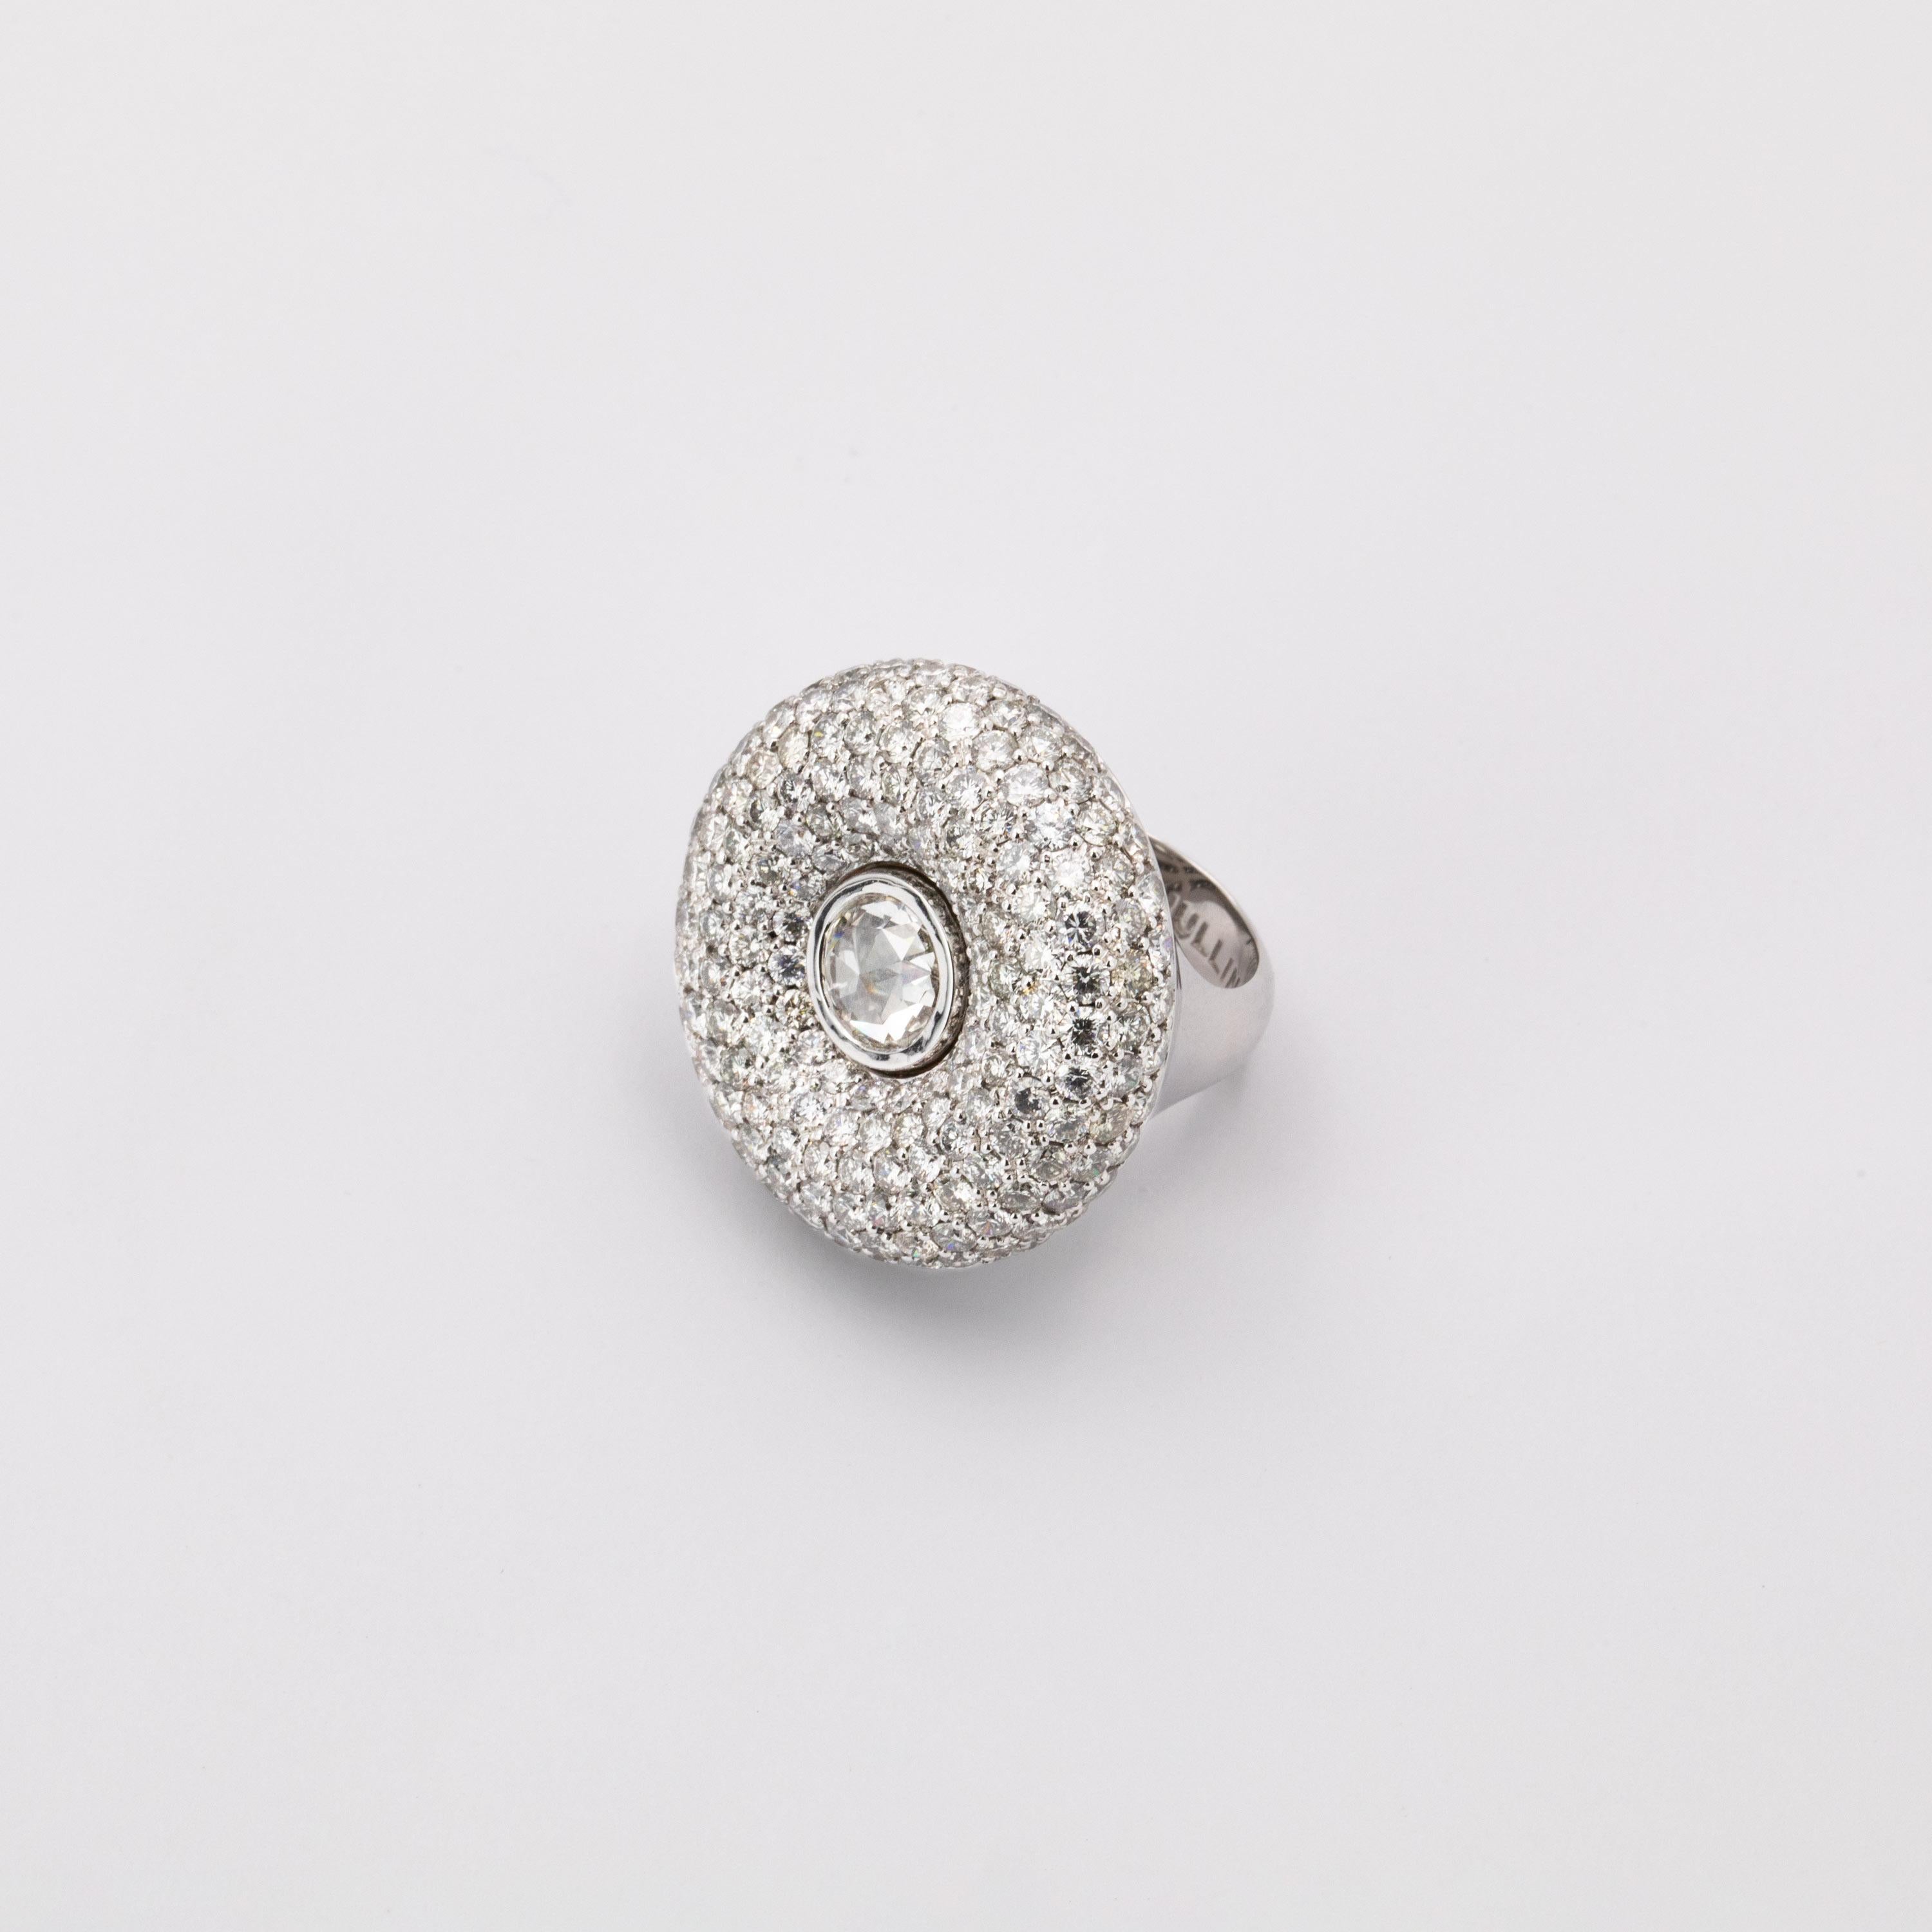 The design of this ring features a voluminous halo of 7, gradually increasing then decreasing rows, set with 202 fancy grey diamonds weighing 10.07 carats, emphasizing the rounded shape. The centre of the voluptuous surface features a 1.64 carat